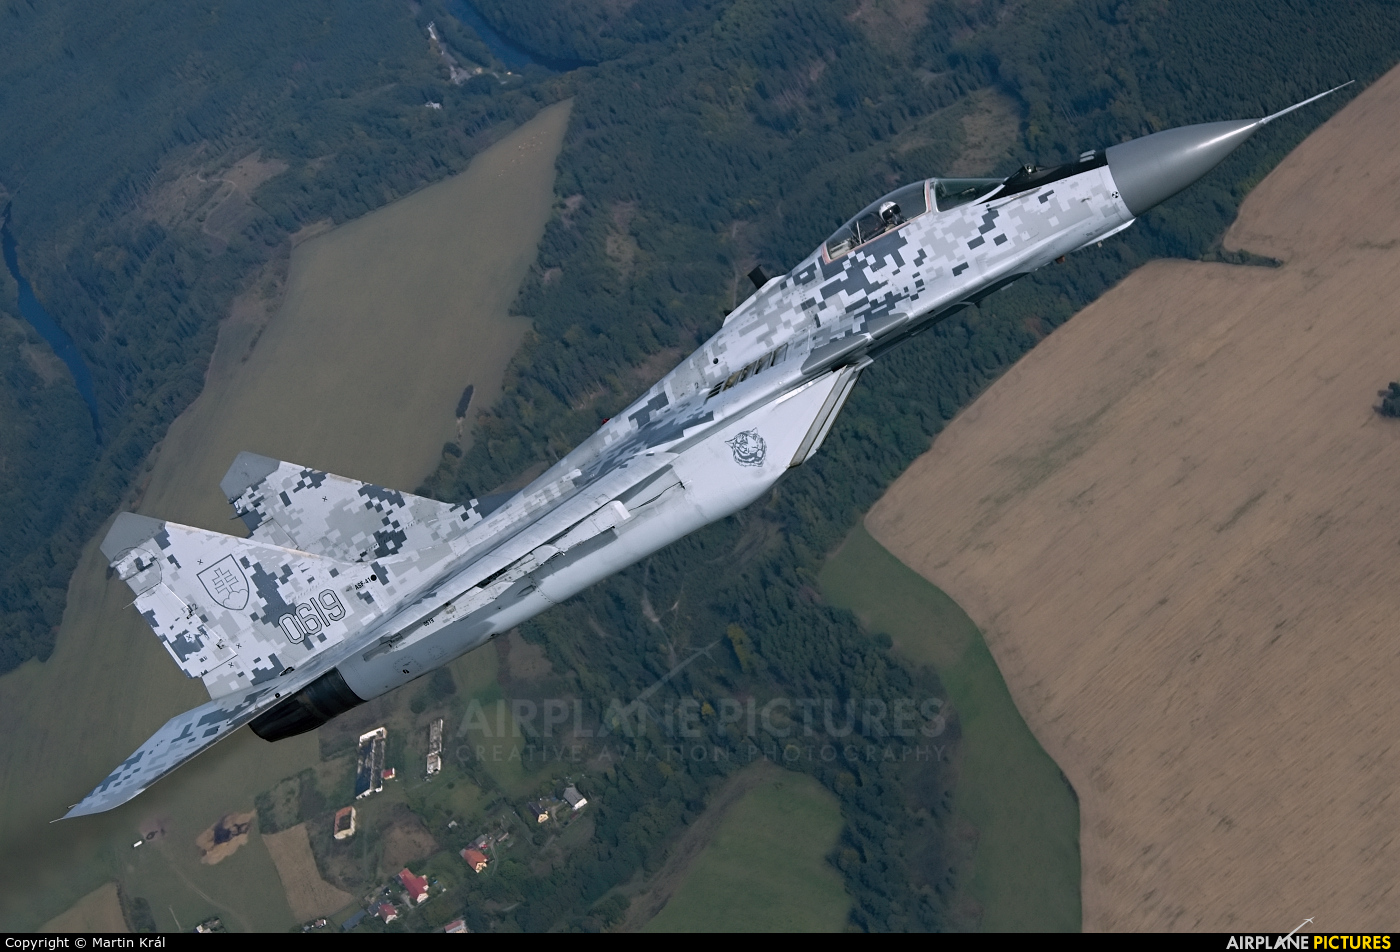 Slovakia -  Air Force 0619 aircraft at In Flight - Czech Republic